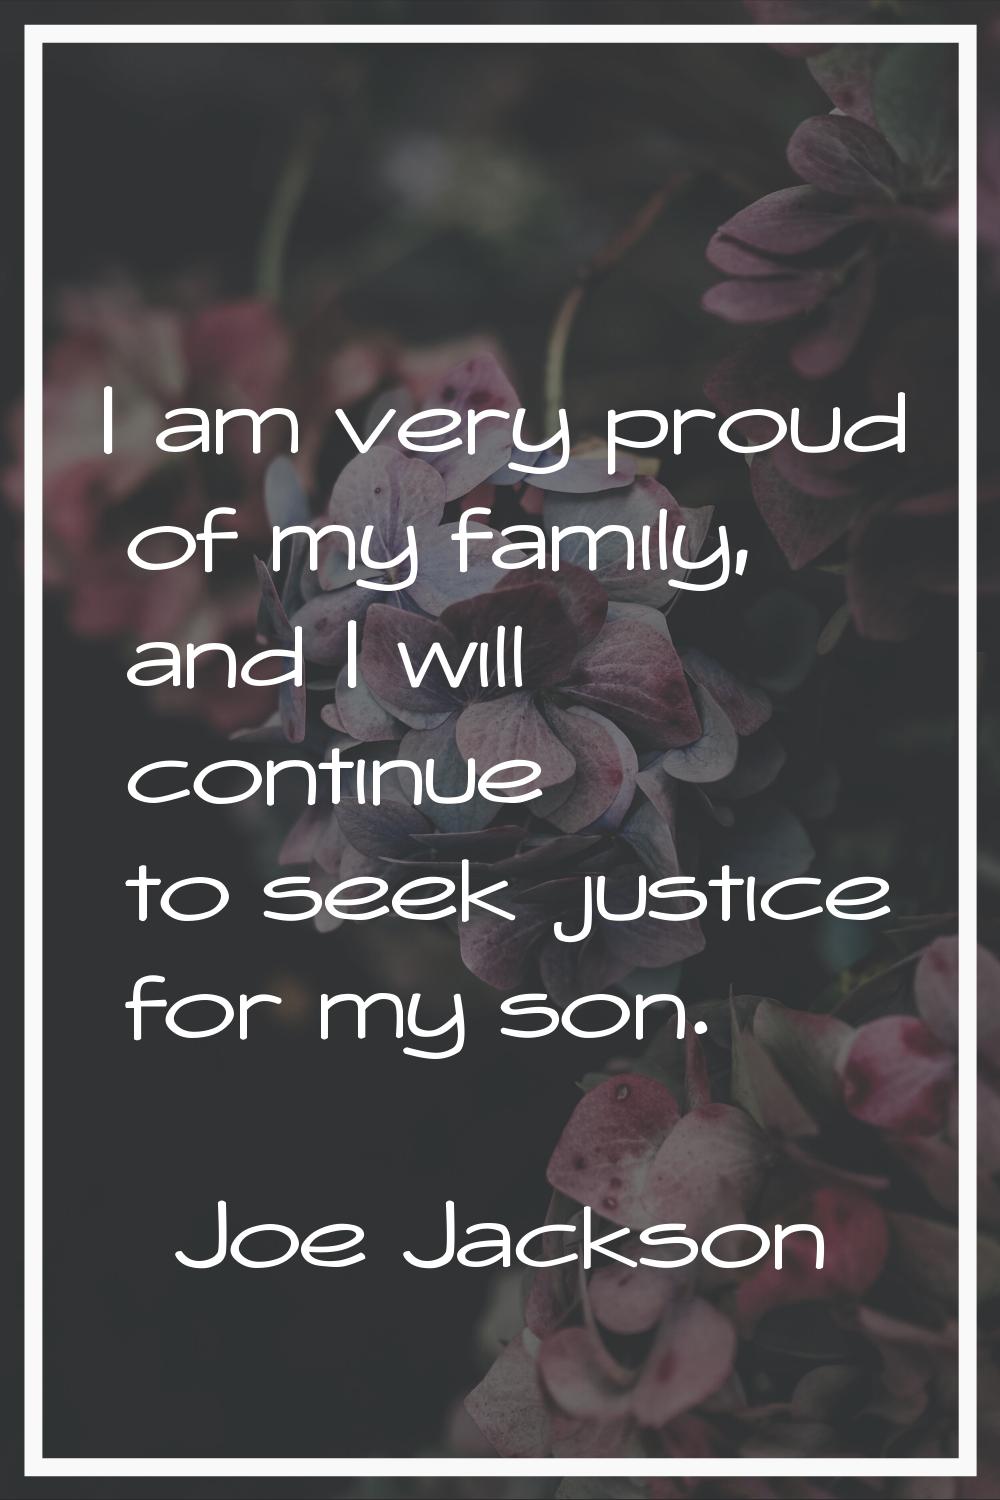 I am very proud of my family, and I will continue to seek justice for my son.